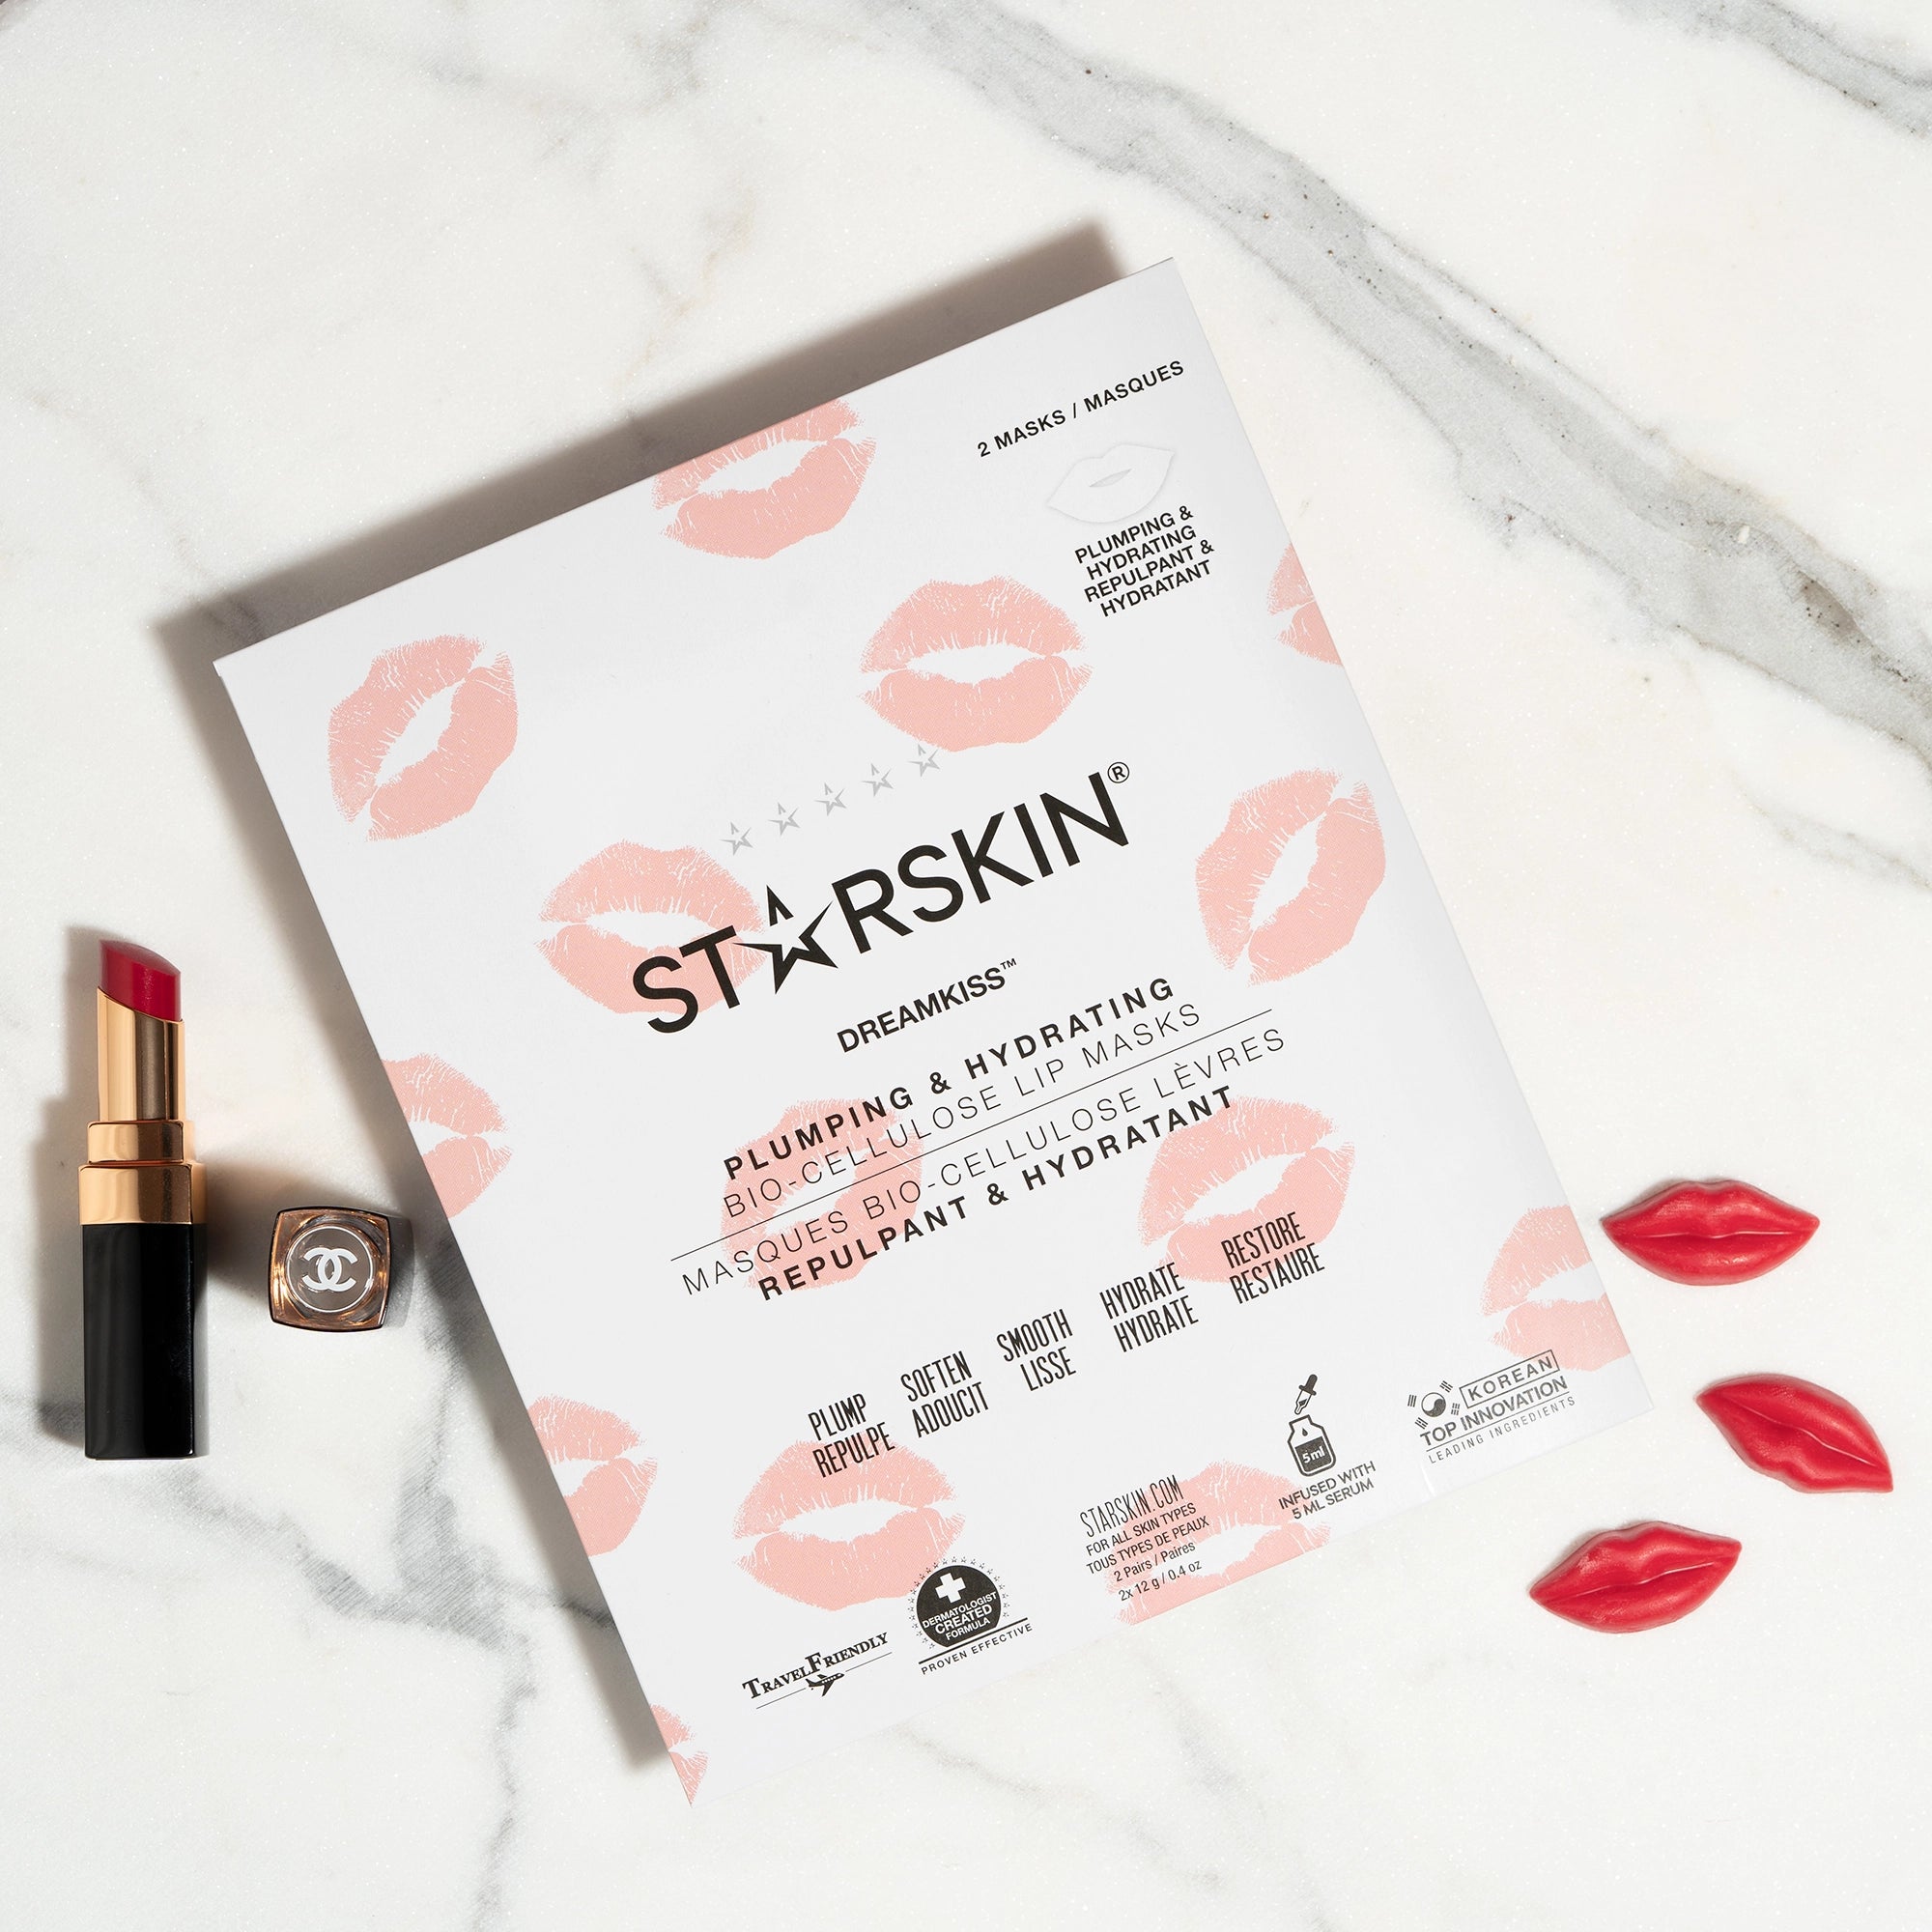 Starskin Dreamkiss lip mask being showcased in a lifestyle picture